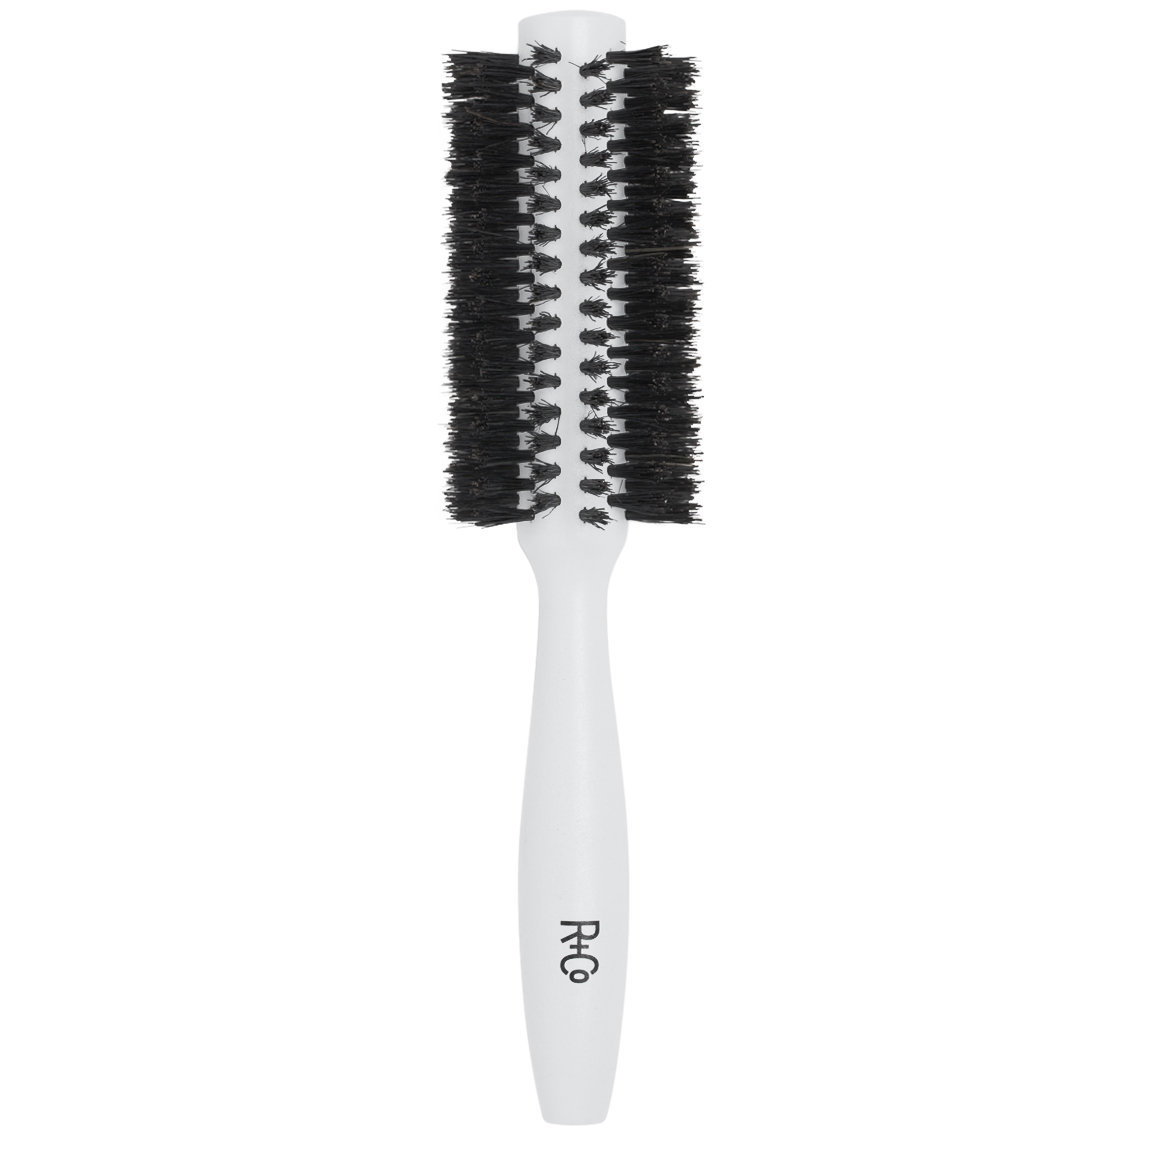 R+Co Round Brush 3 alternative view 1 - product swatch.